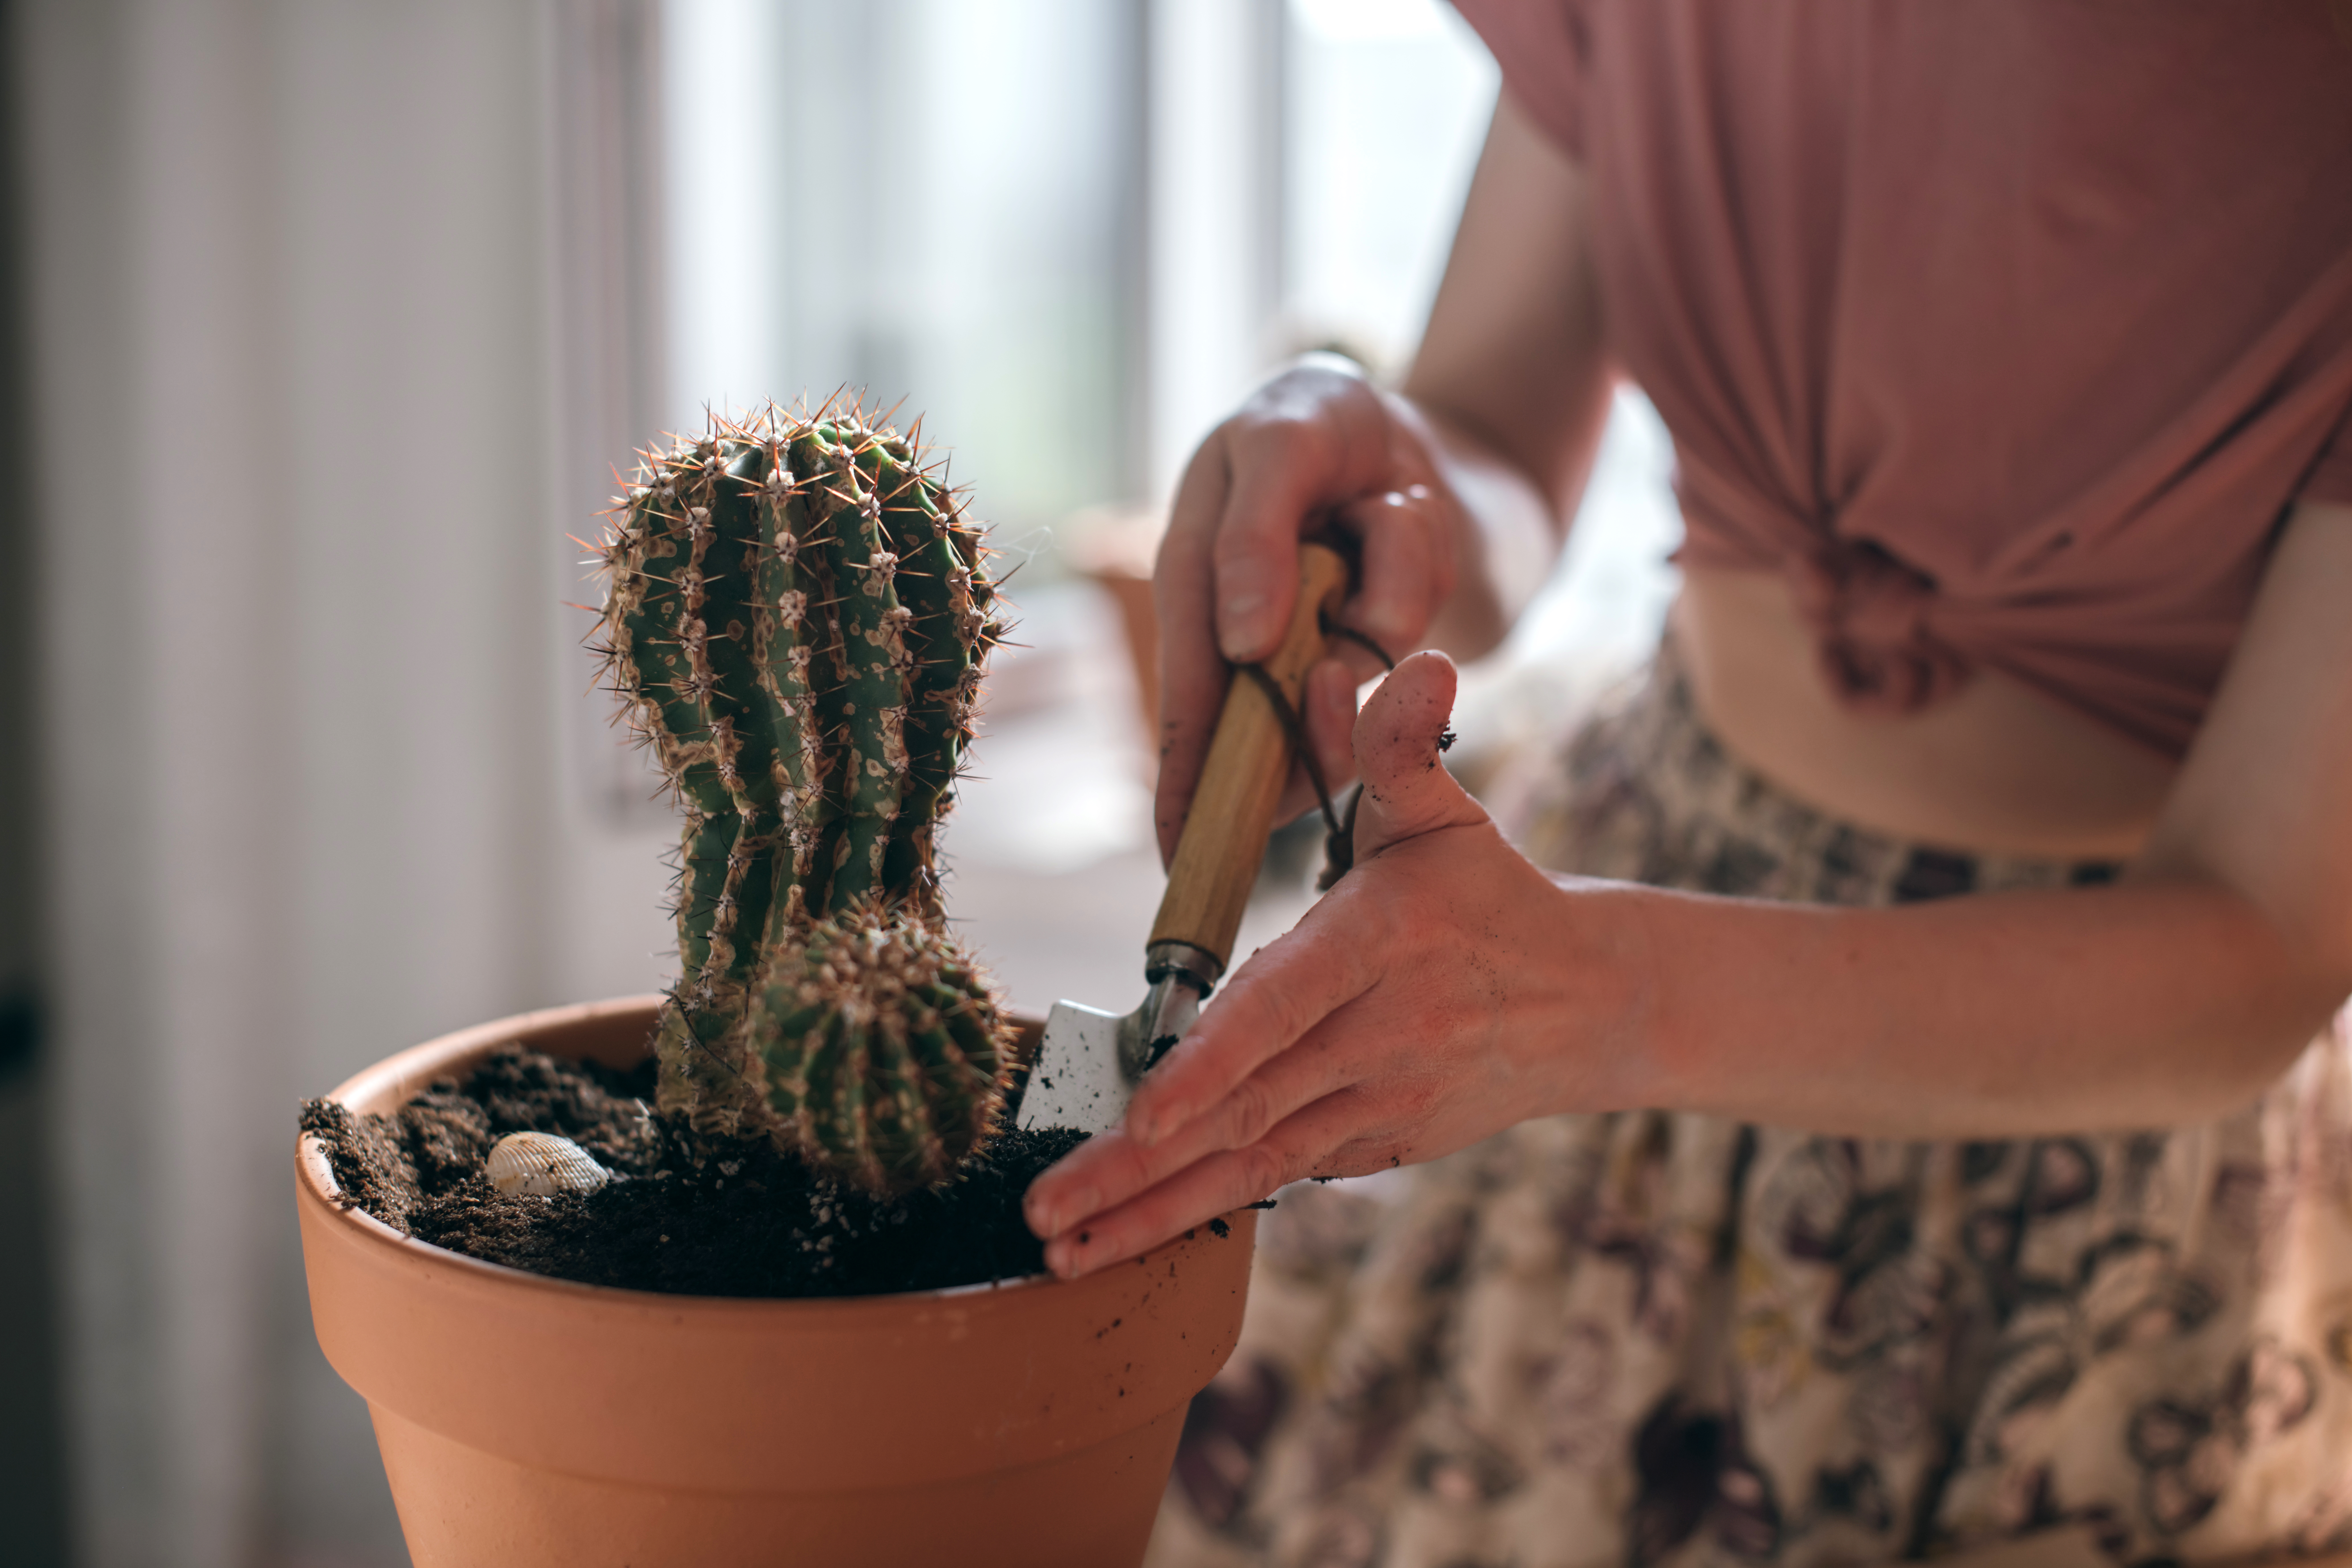 Woman repotting a cactus without wearing gloves.